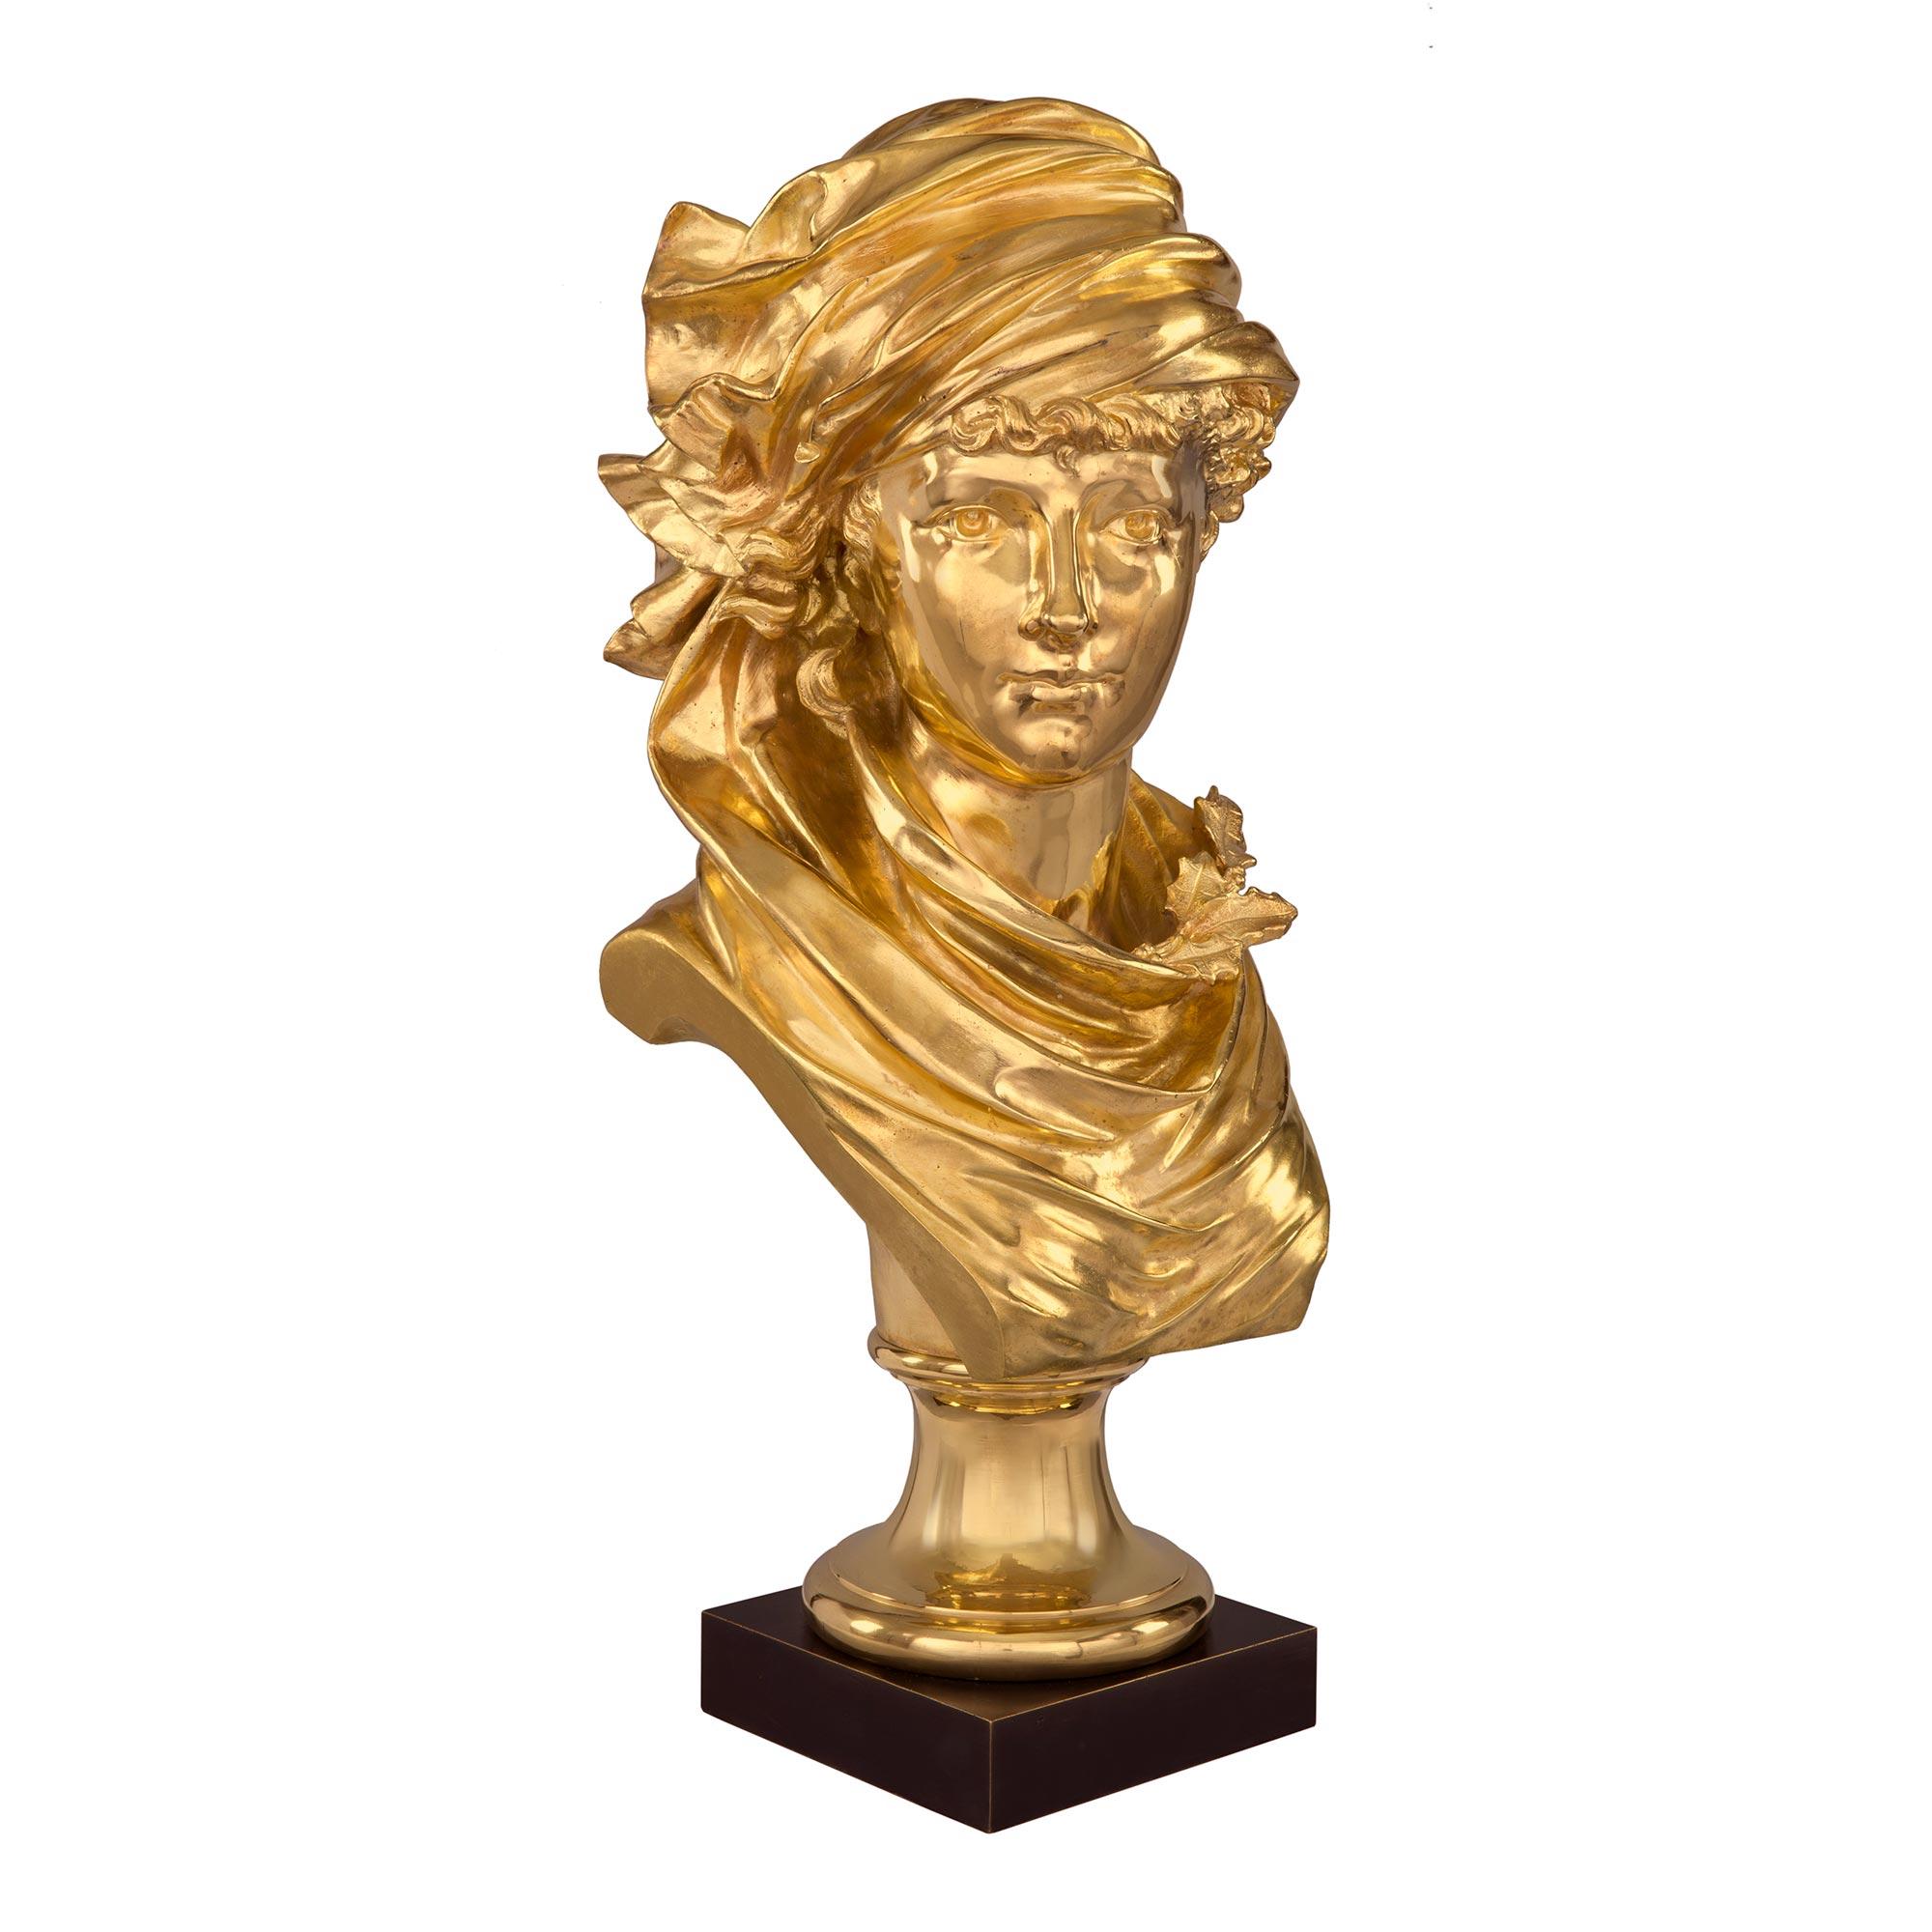 A striking French 19th century Louis XVI st. ormolu bust of a young maiden signed A. Rollé. The bust is raised by a square patinated bronze base below a circular ormolu socle pedestal with a mottled border. The beautiful maiden above is draped in a